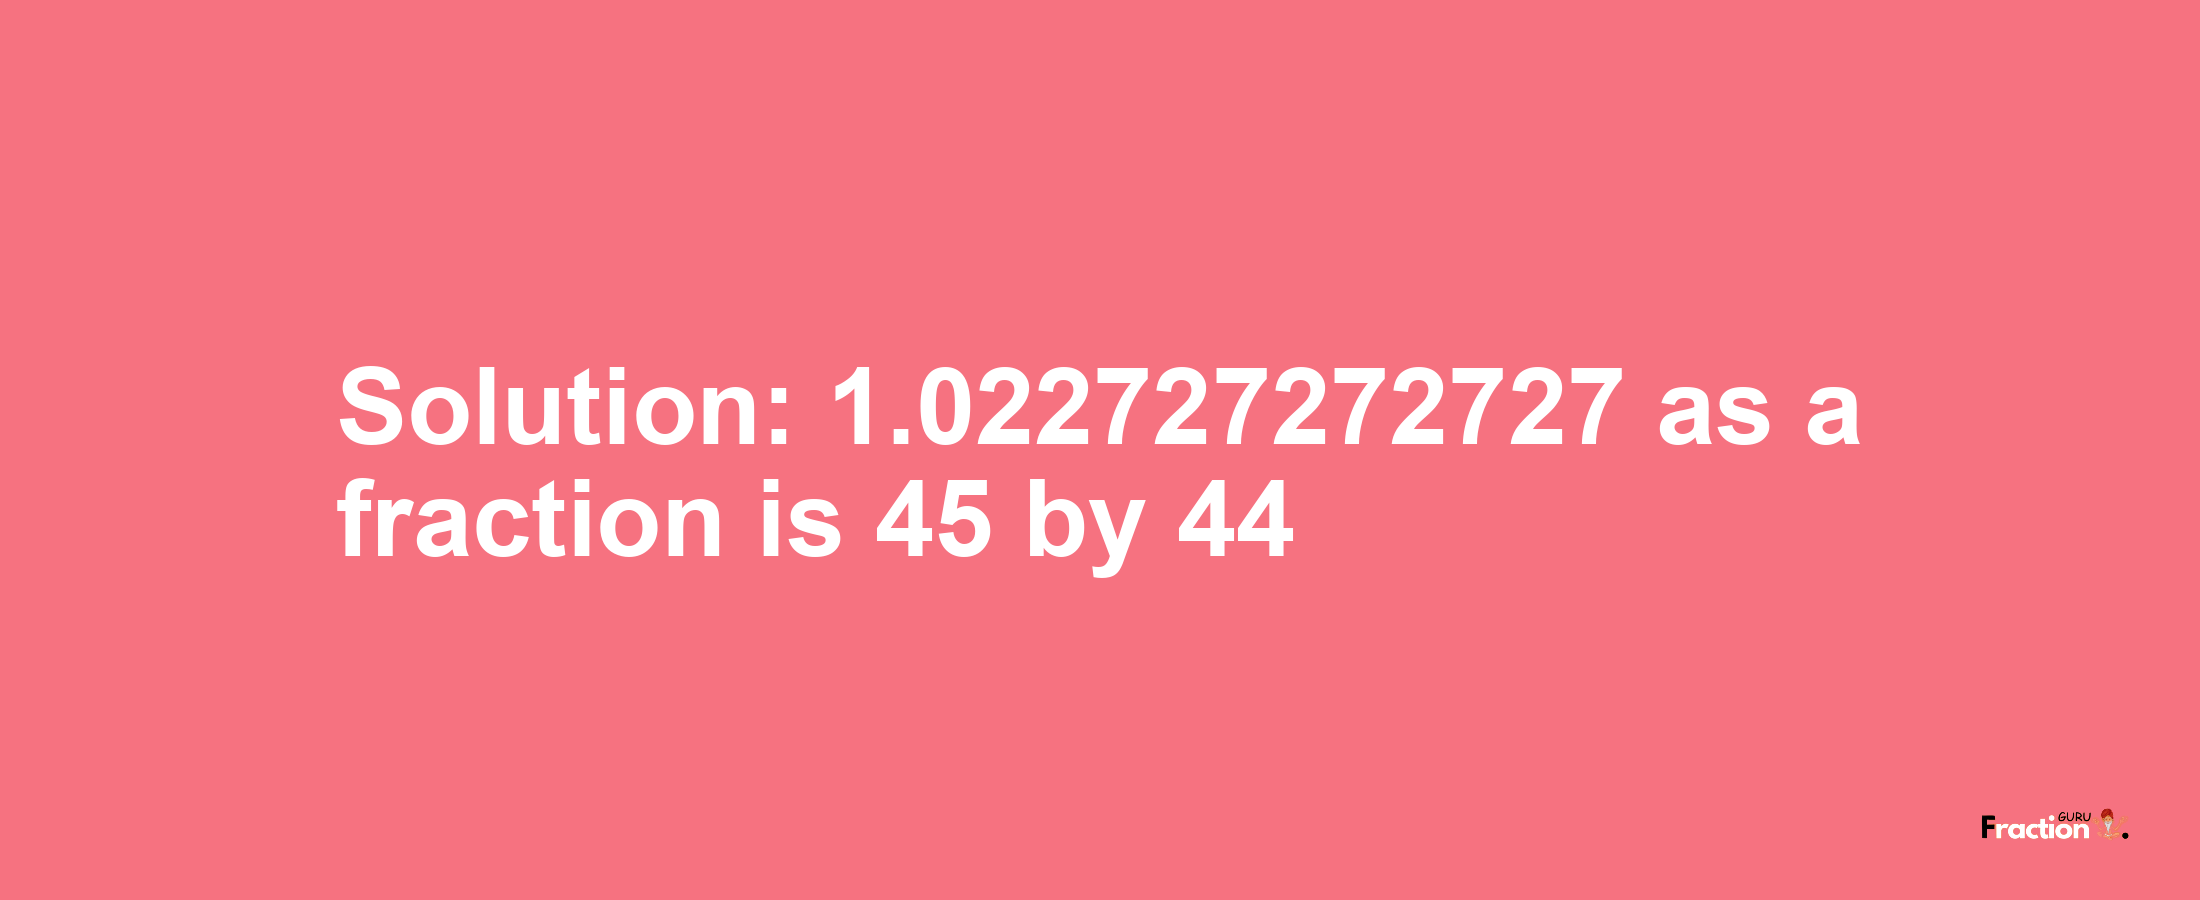 Solution:1.022727272727 as a fraction is 45/44